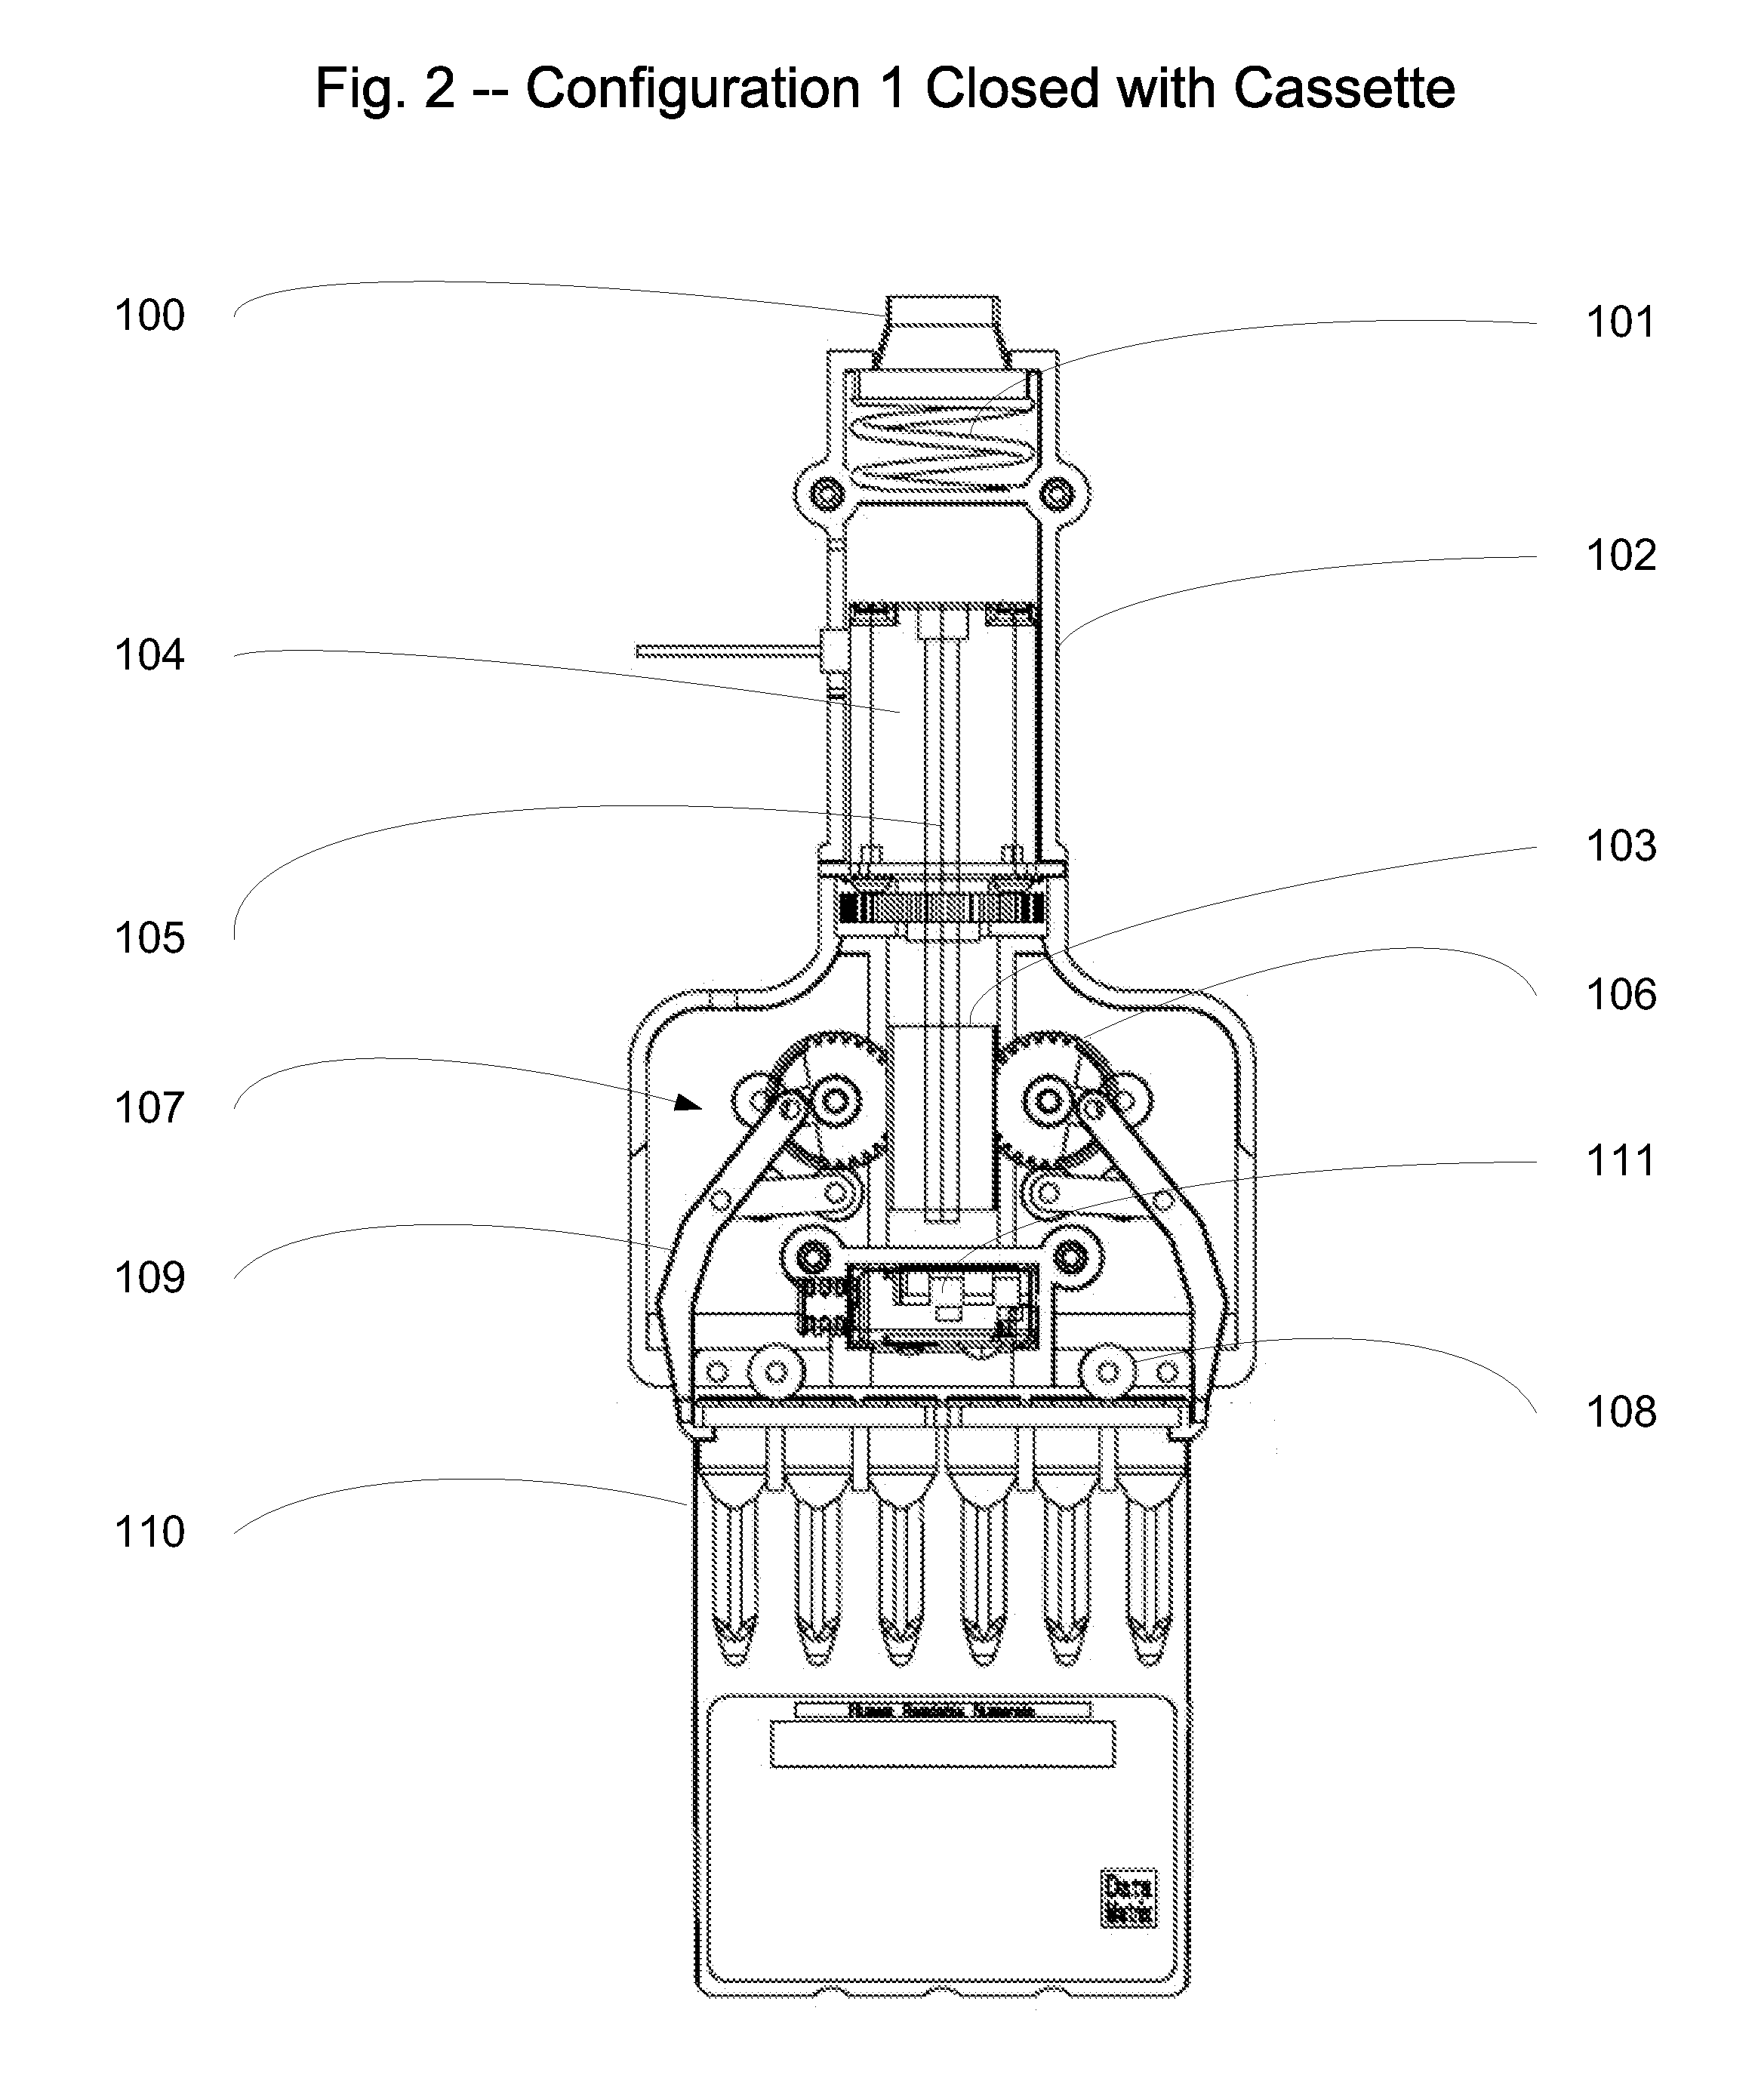 Apparatus for gripping and holding diagnostic cassettes